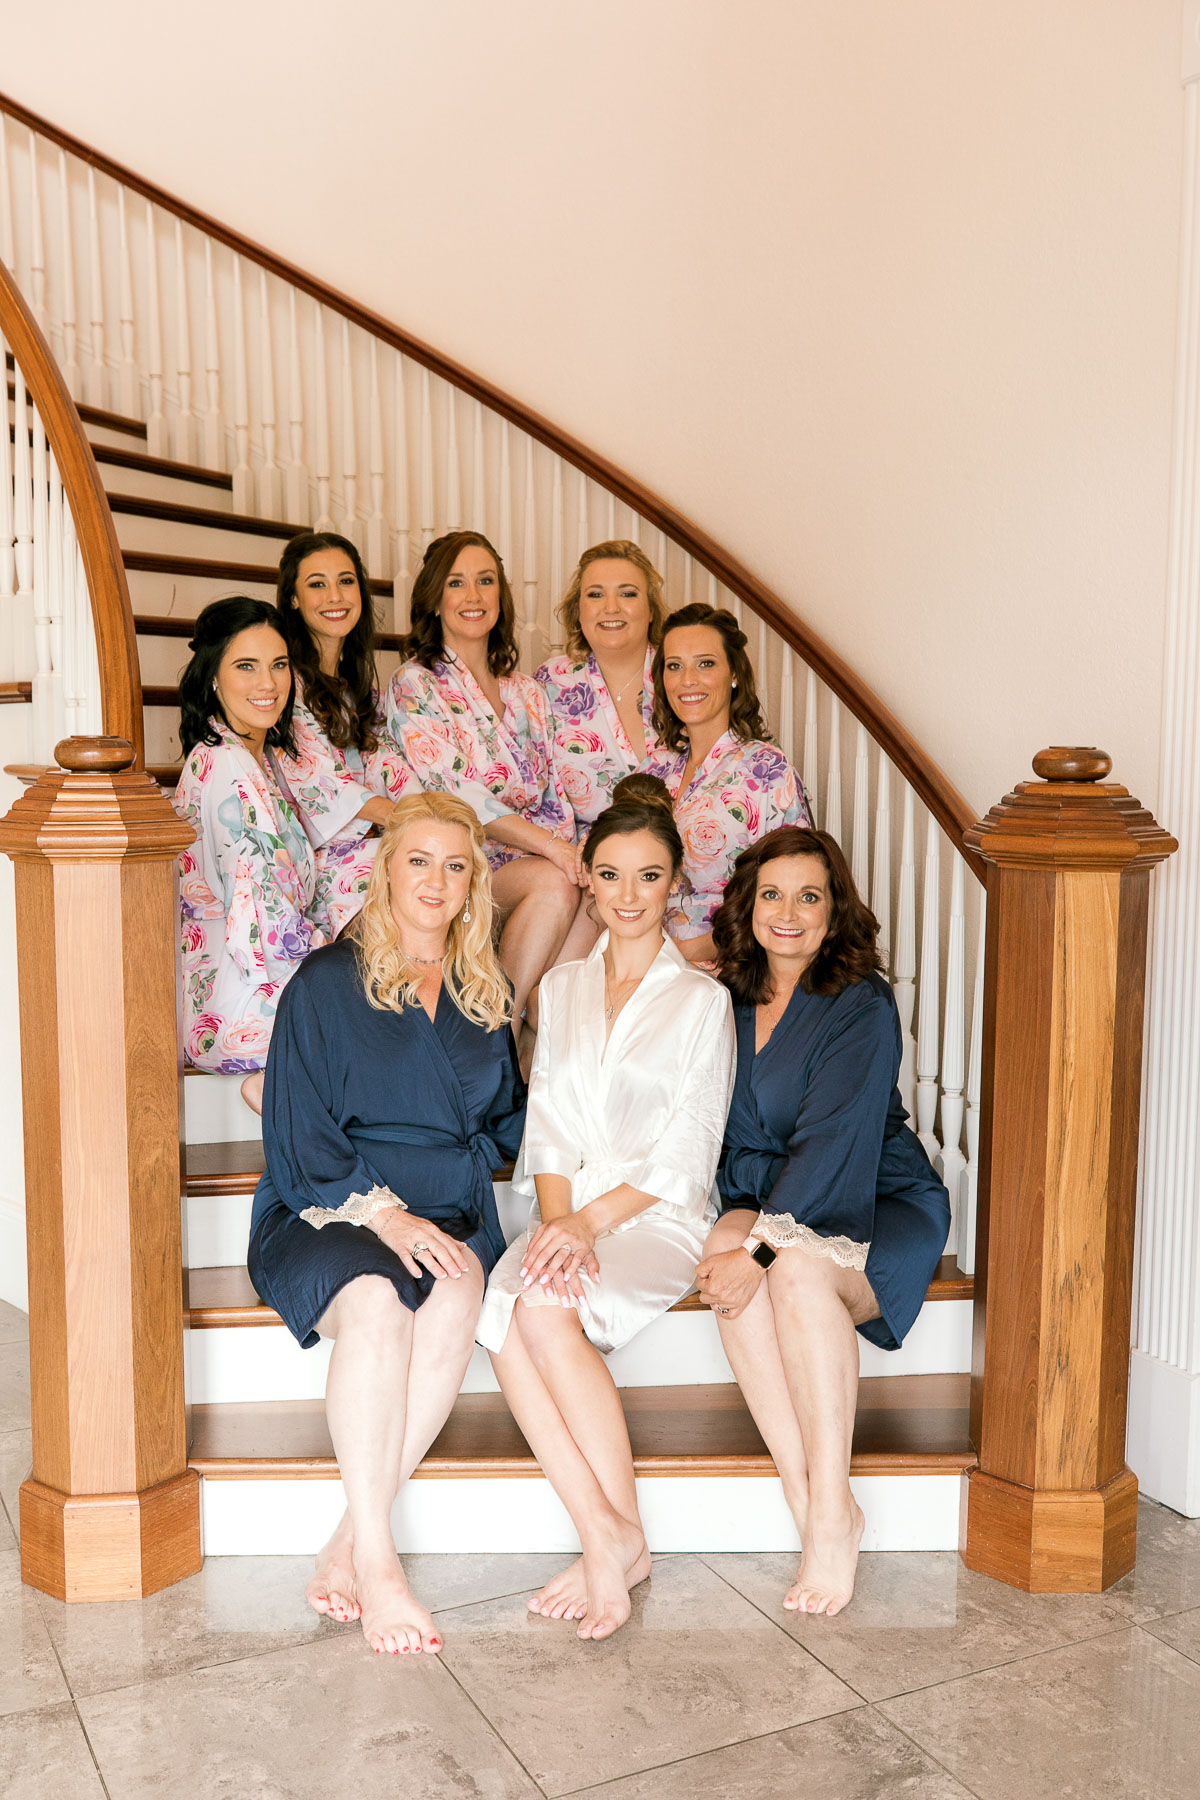 Bride with bridal party on the steps of grand staircase